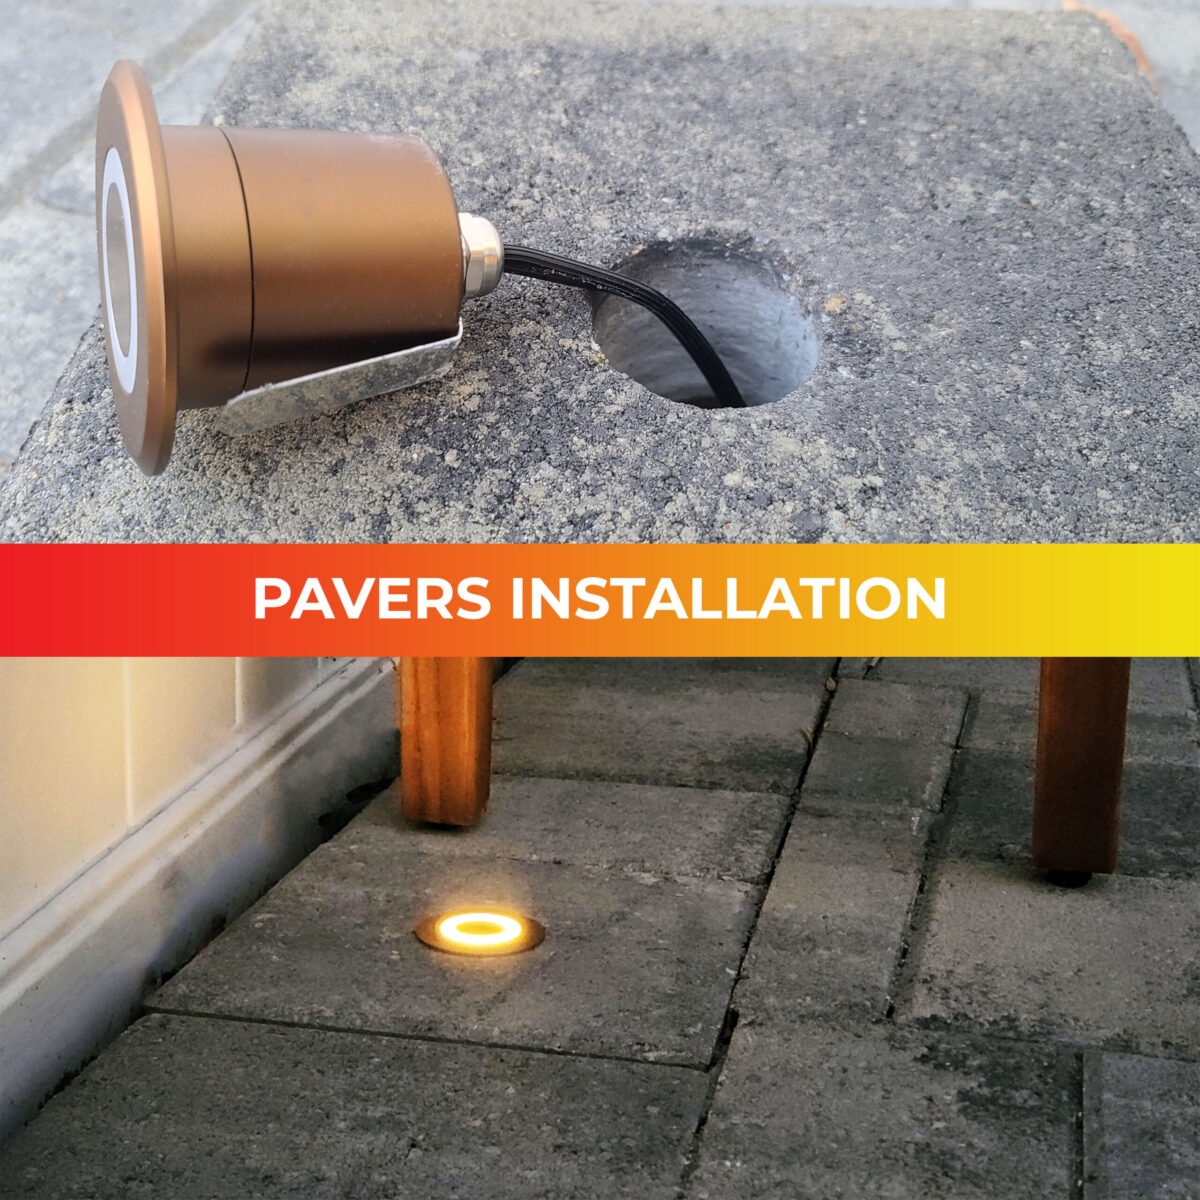 Lumengy deck and pavers lights, driveway walkway lighting 12V 6